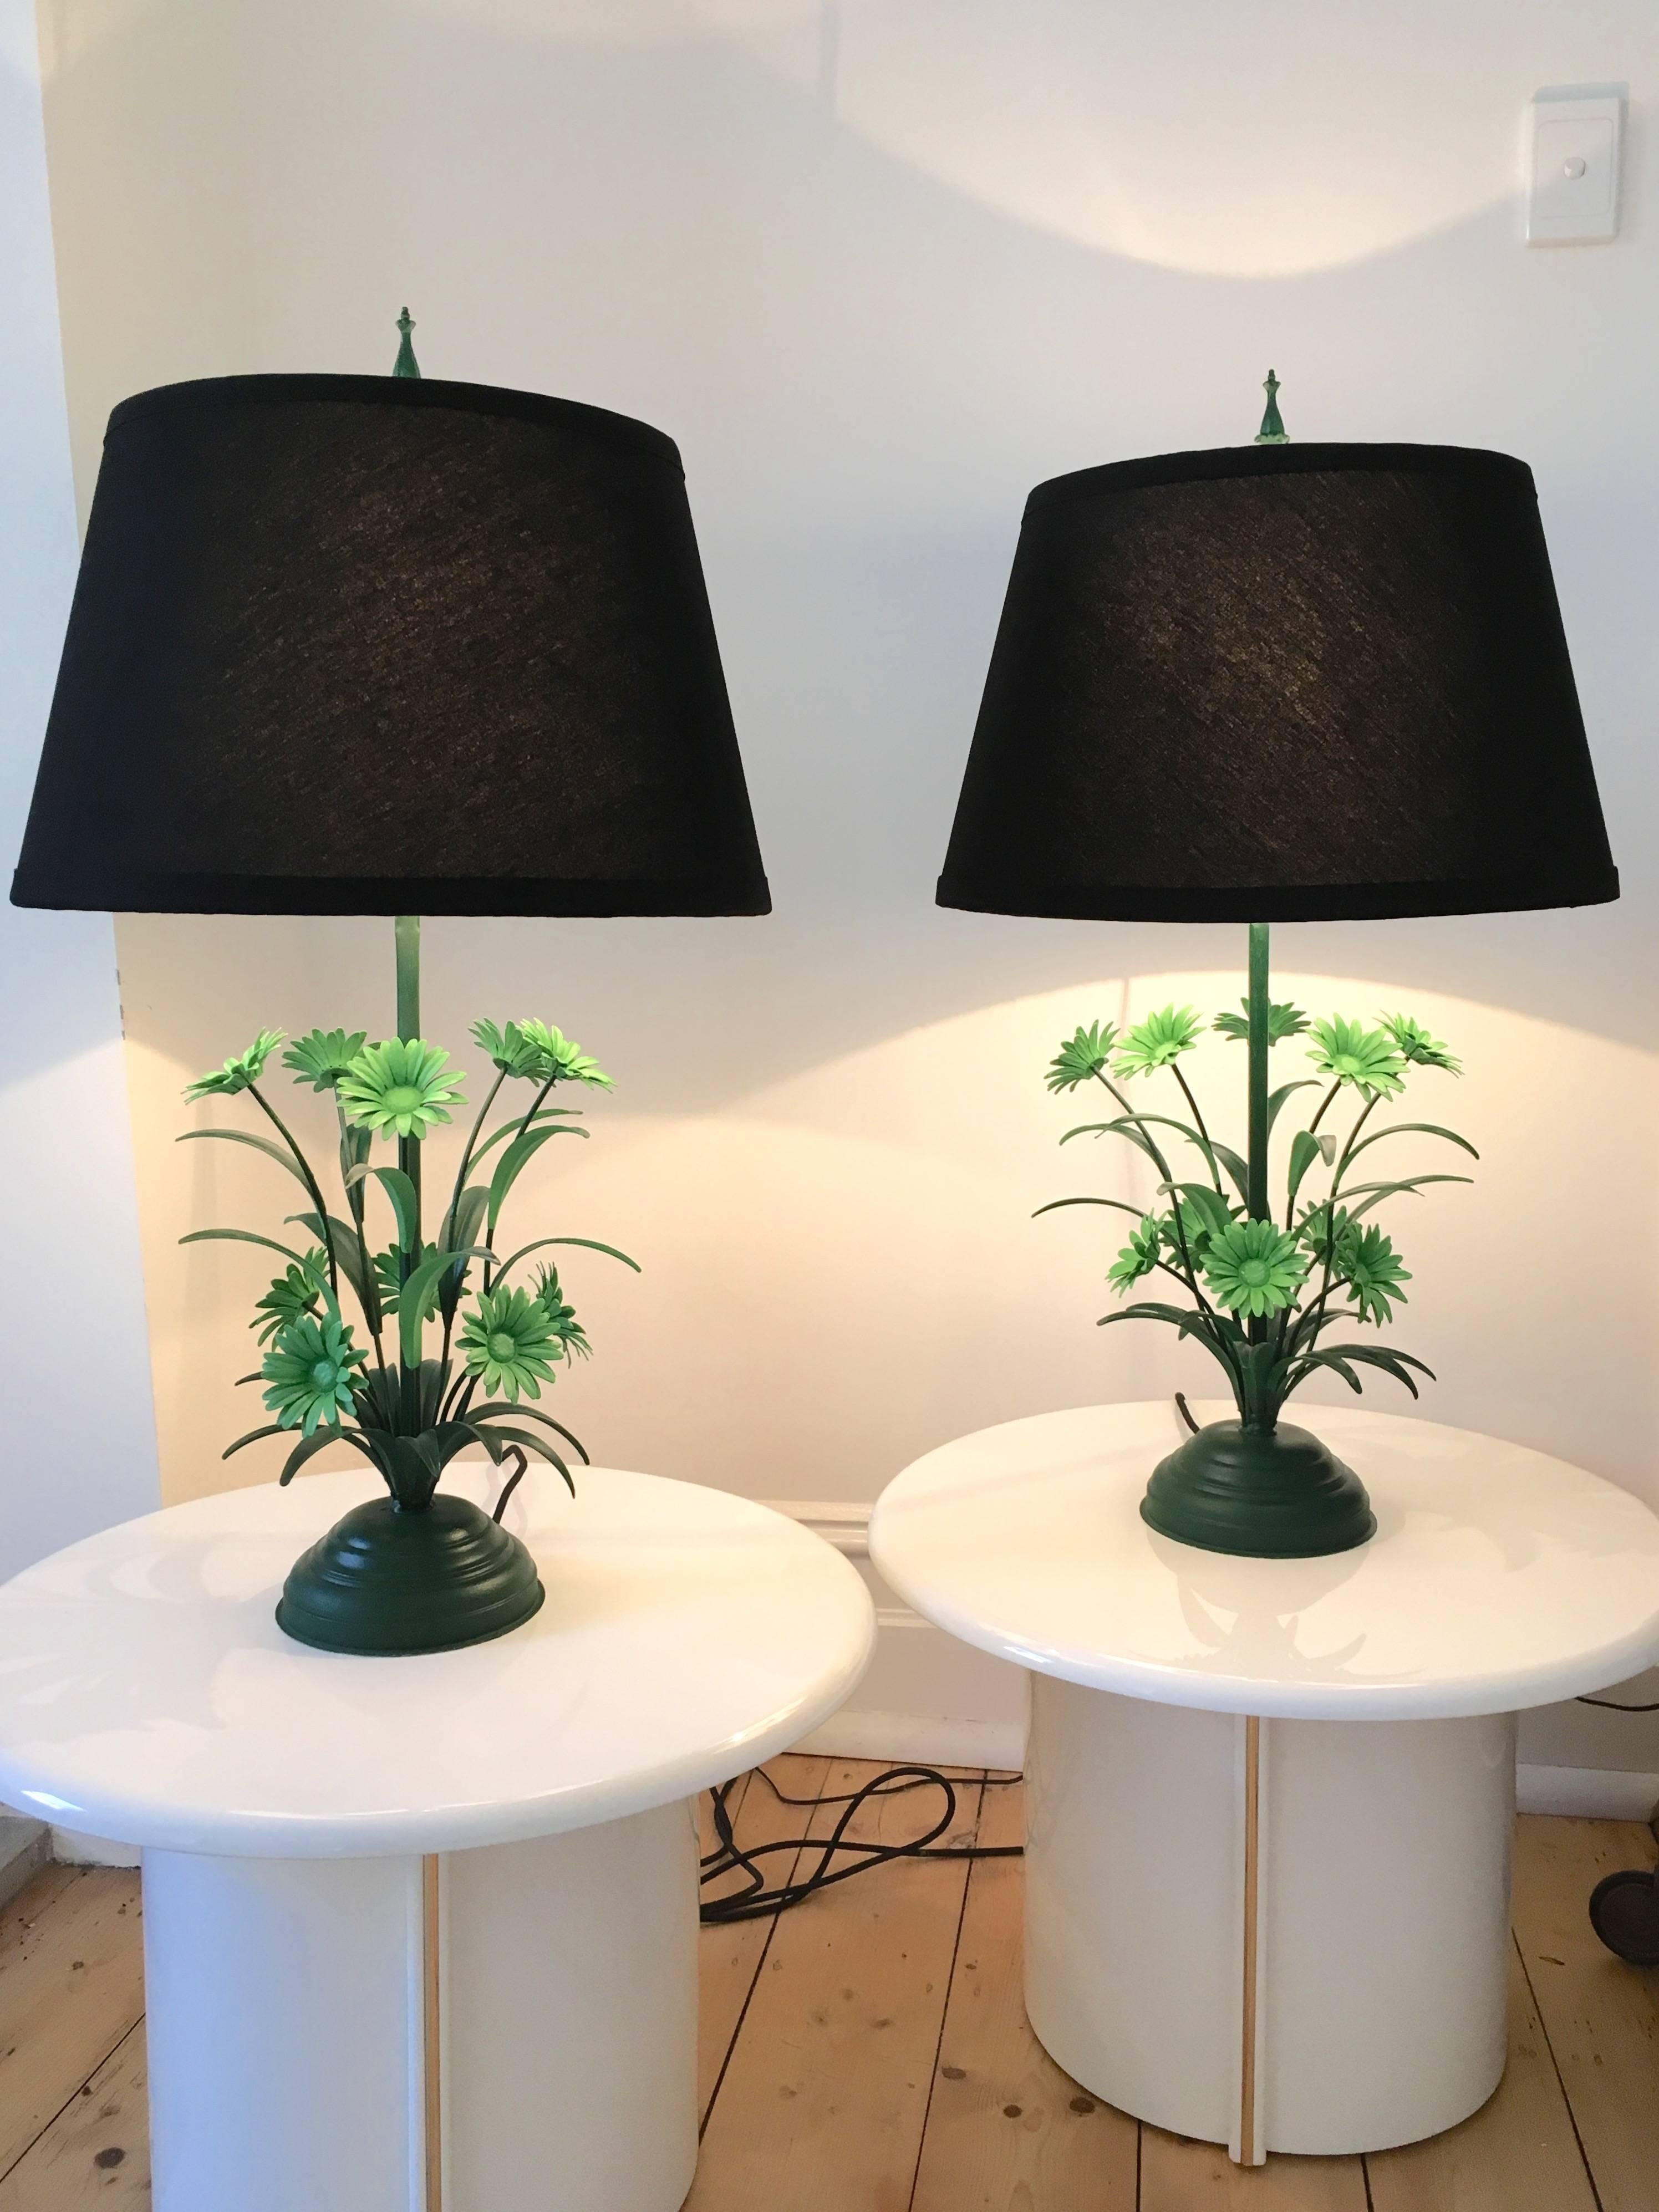 A sweet pair of toleware Daisy table lamps that offer charm and sophistication in equal parts. The bases push a little into the realm of kitsch with their twin-tone mint and Amsterdam green leaves and flowers. The metalwork pings off the low-fi